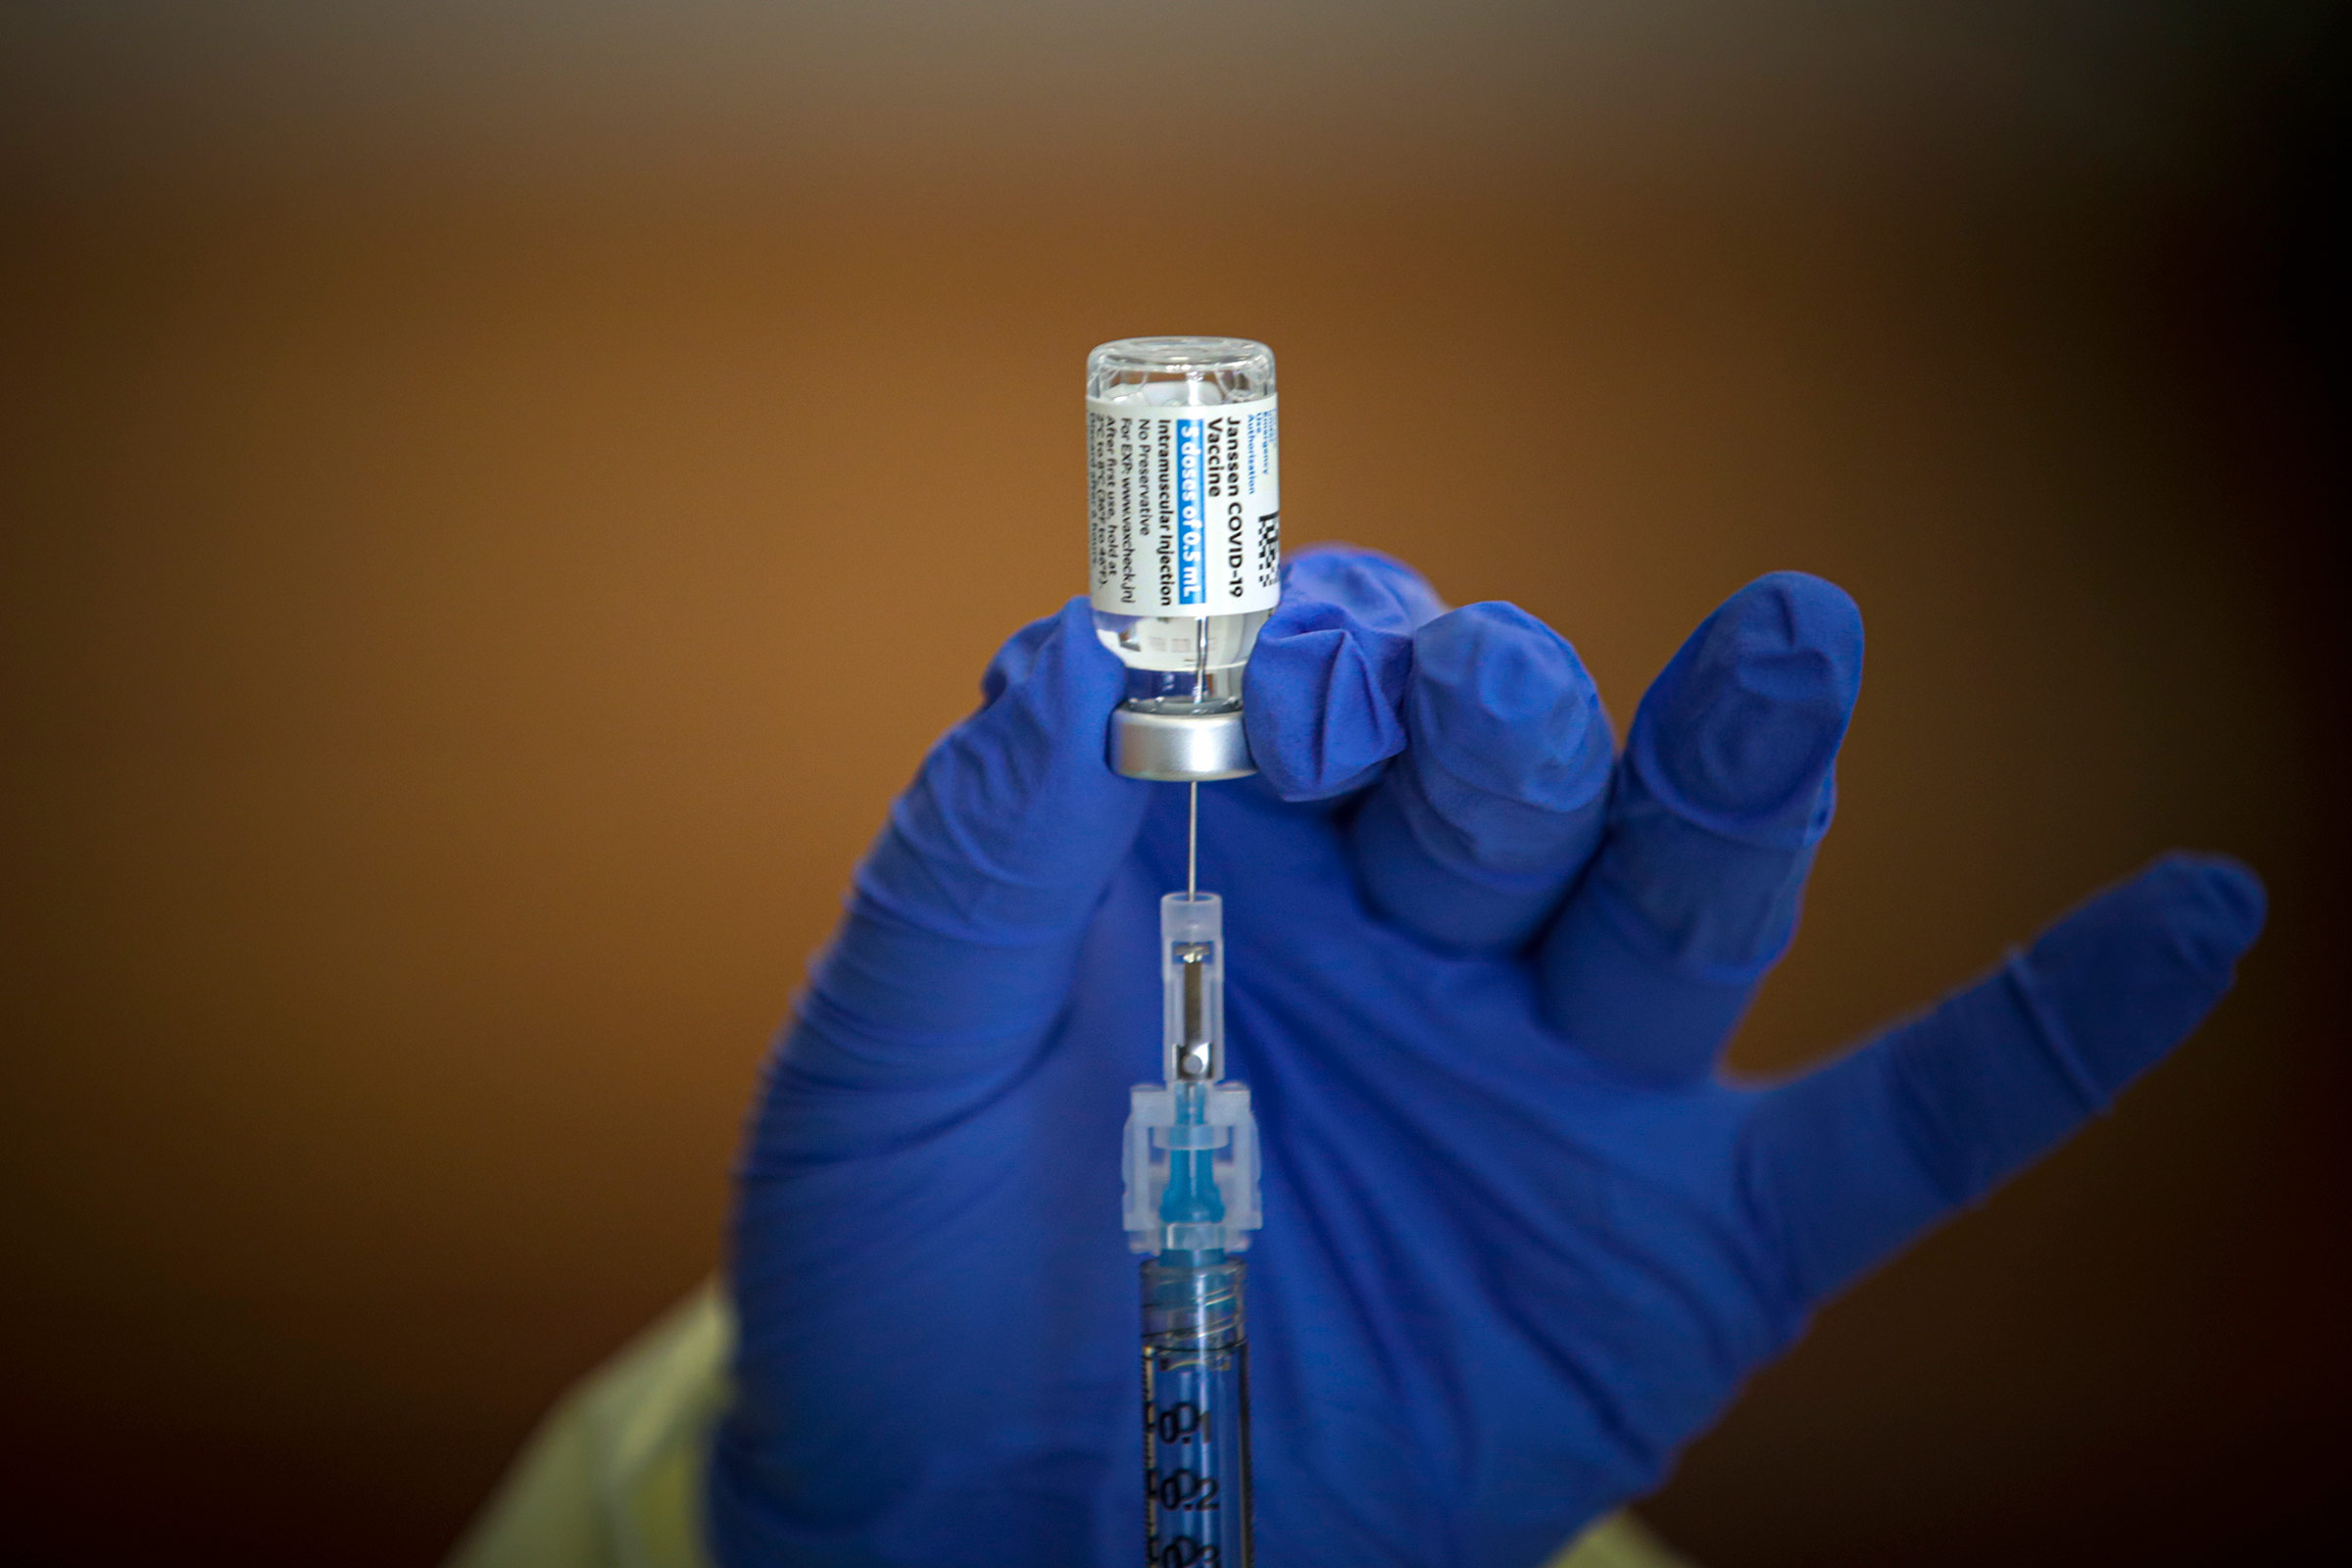 A Johnson & Johnson Covid-19 vaccine is prepared at a vaccination clinic in Lakewood, CA, on March 31.